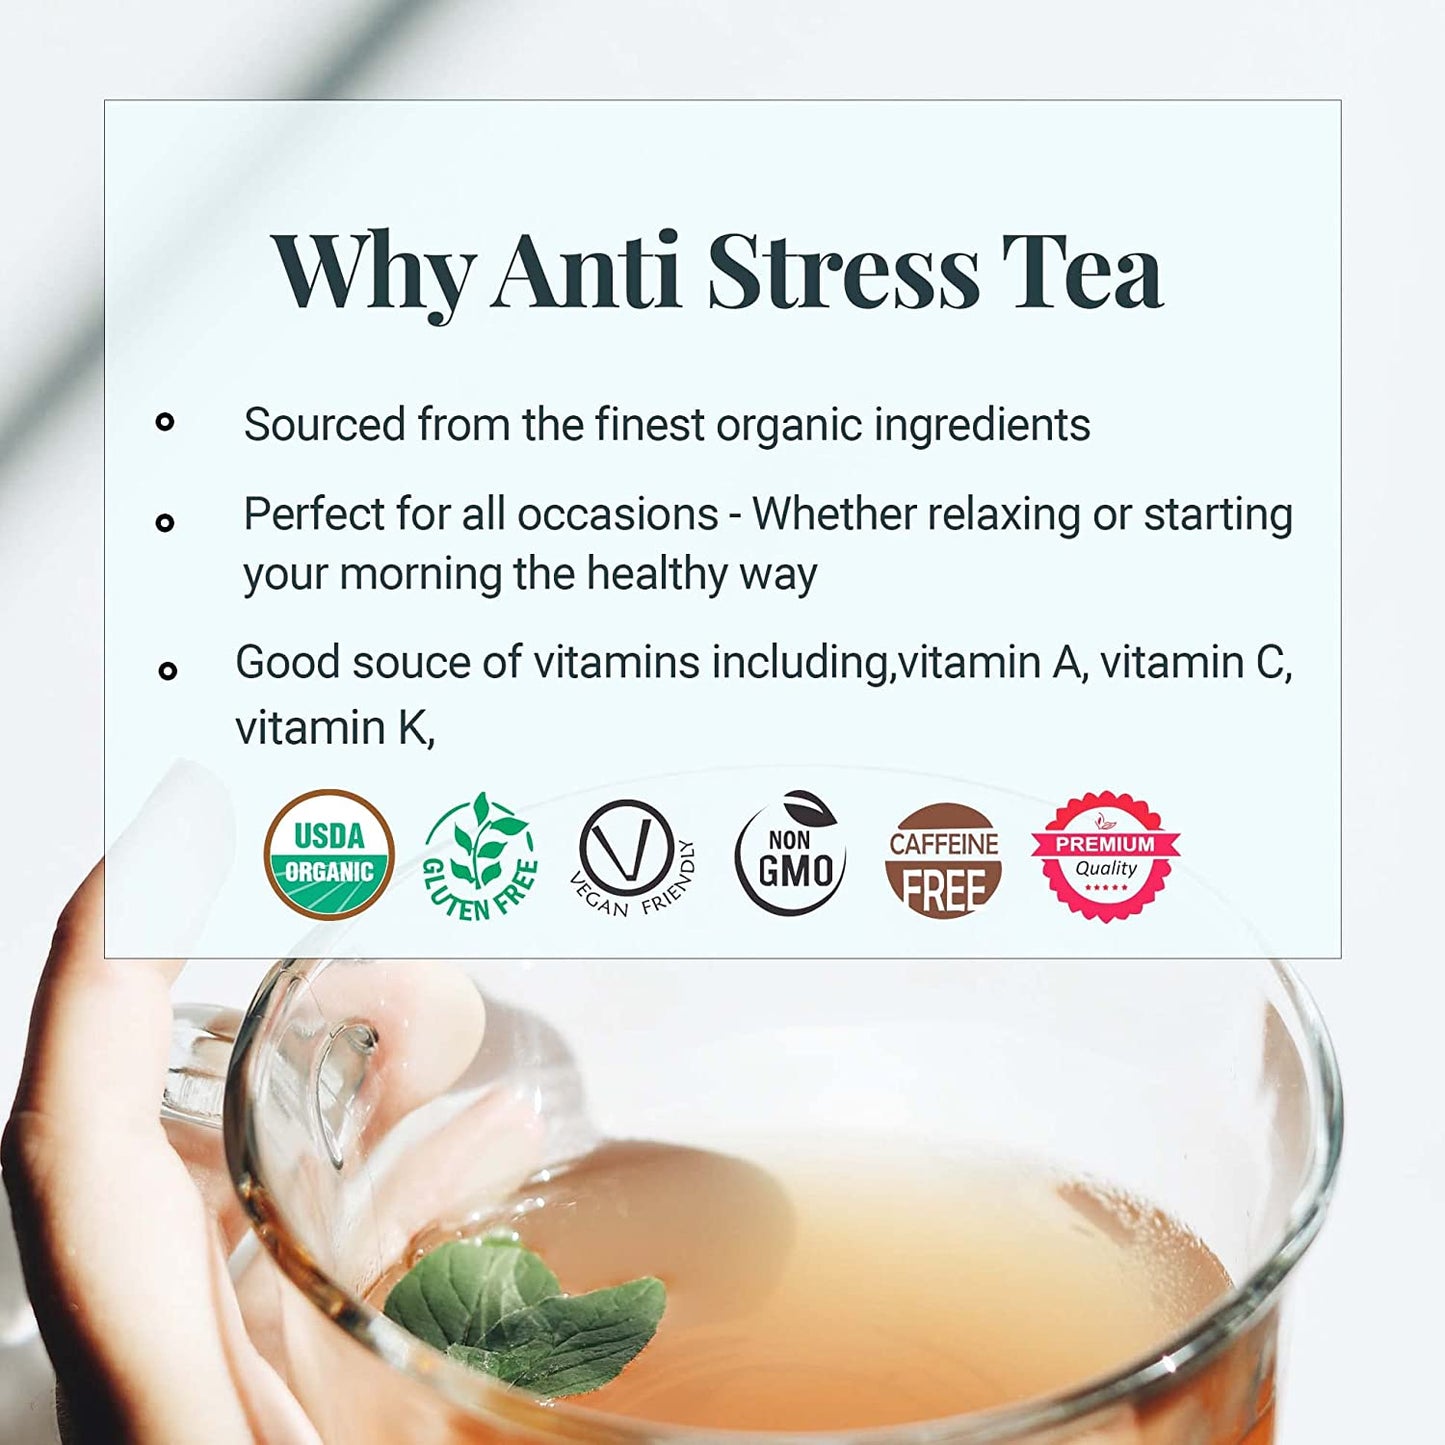 
                  
                    Why anti stress tea. sourced from the finest organic ingredients. Perfect for all occasions - Whether relaxing or starting your morning the healthy way. - good source of vitamins including, vitamin A, Vitamin C, vitamin K. USDA organic , Gluten Free , Vegan Friendly , NON GMO, Caffeine free Premium Quality
                  
                